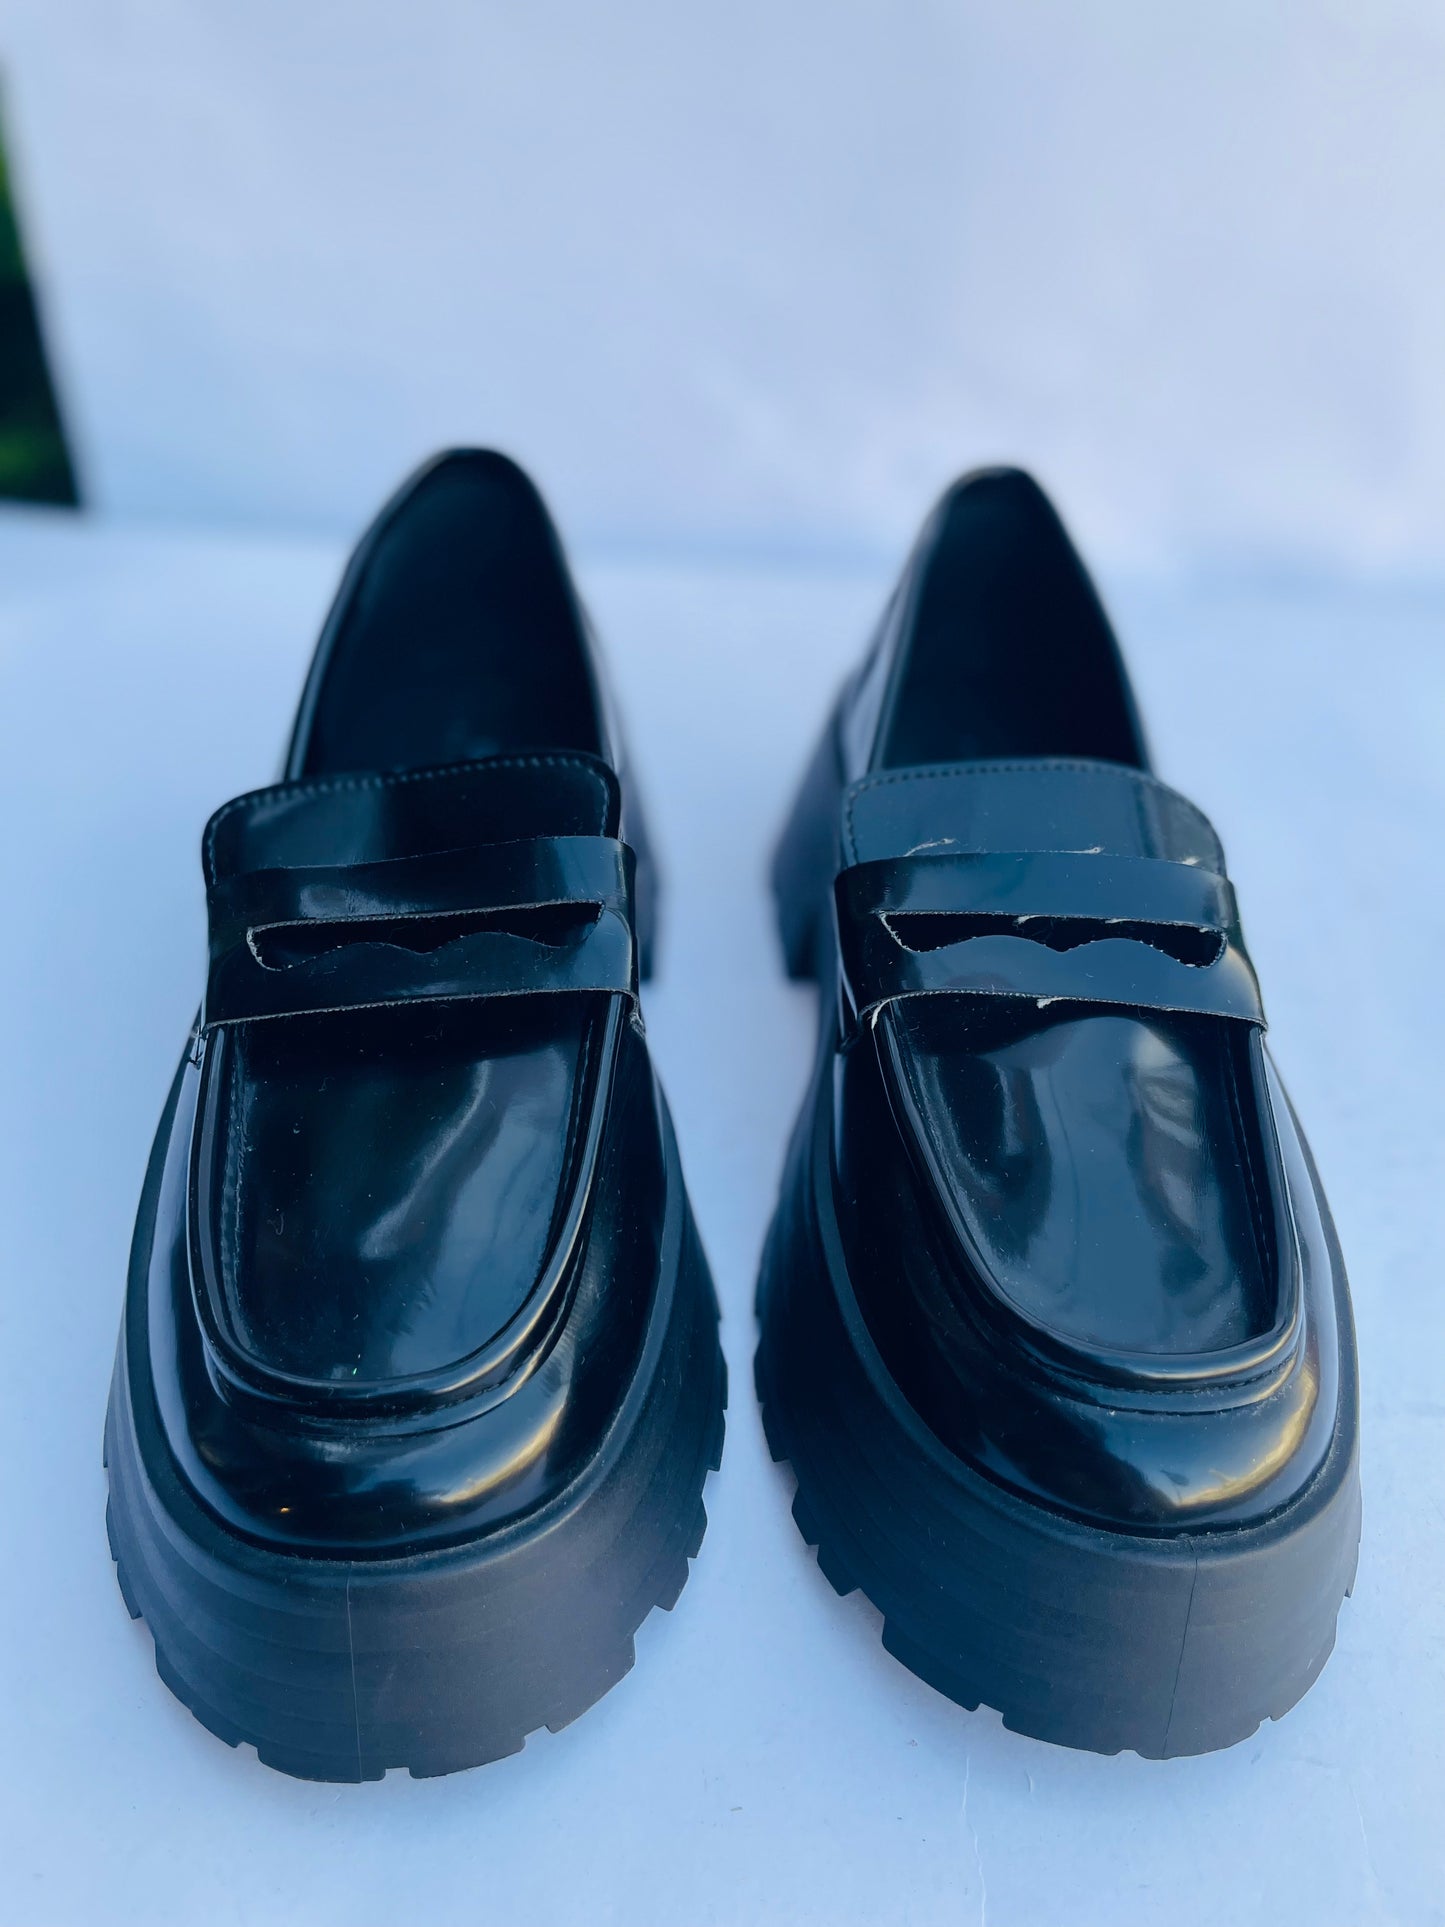 Asos heeled loafers shoes